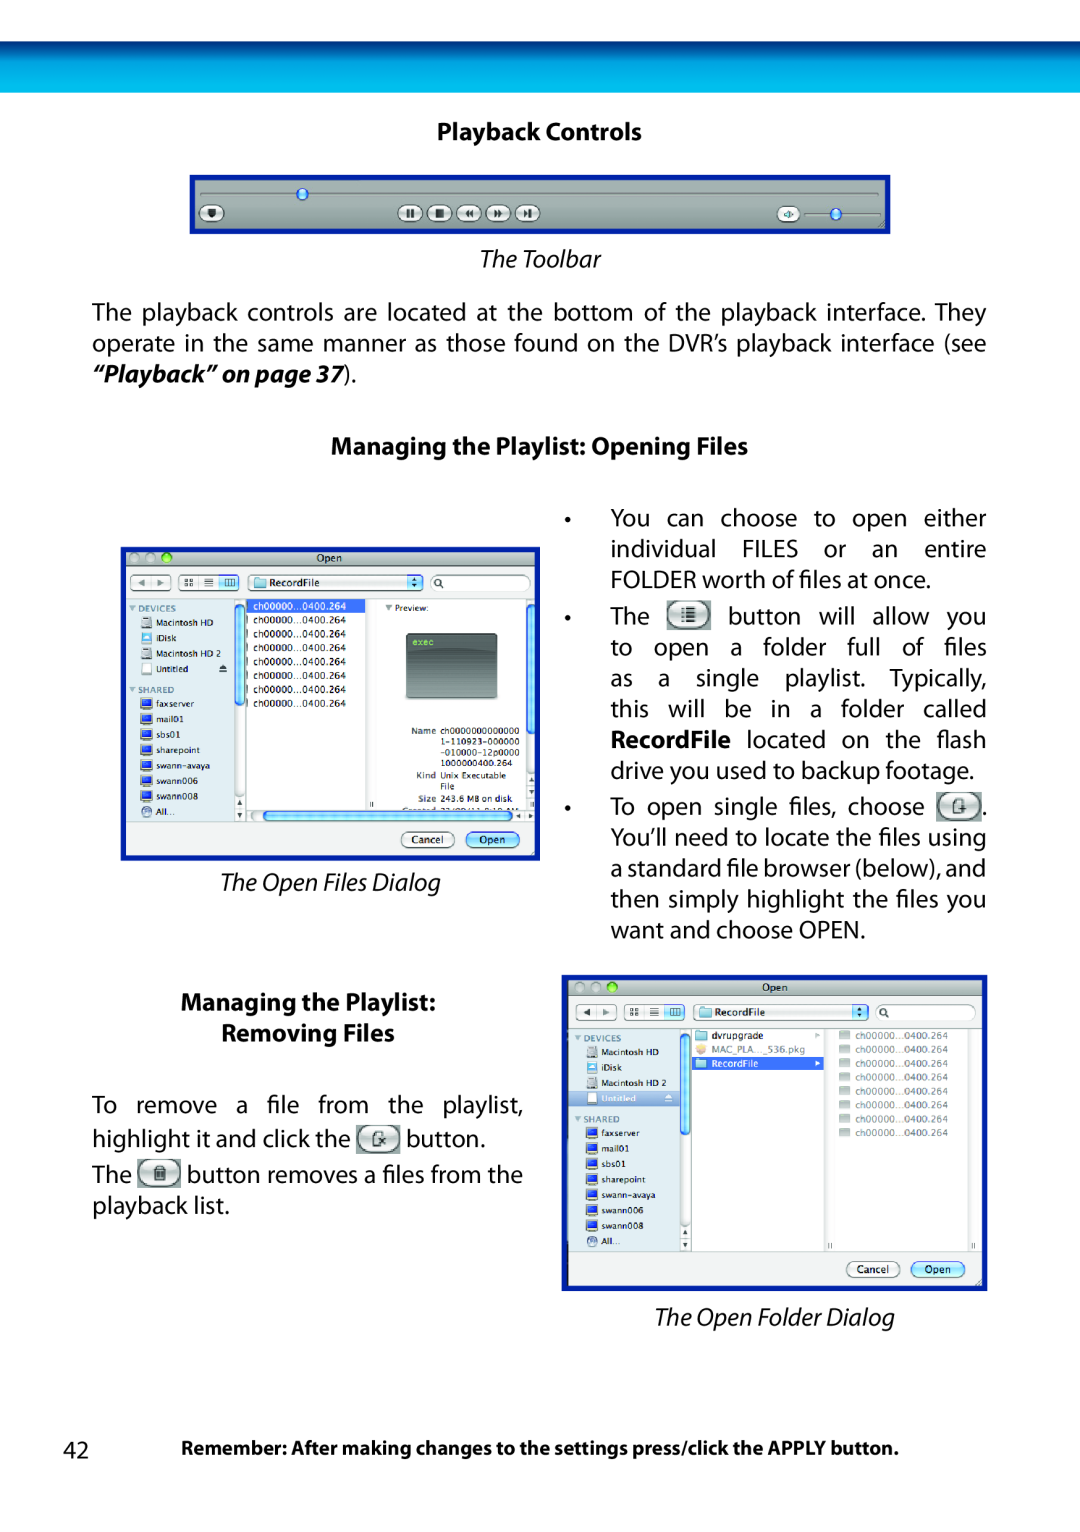 Swann H.264 The Toolbar, Managing the Playlist Opening Files, The Open Files Dialog, Managing the Playlist Removing Files 